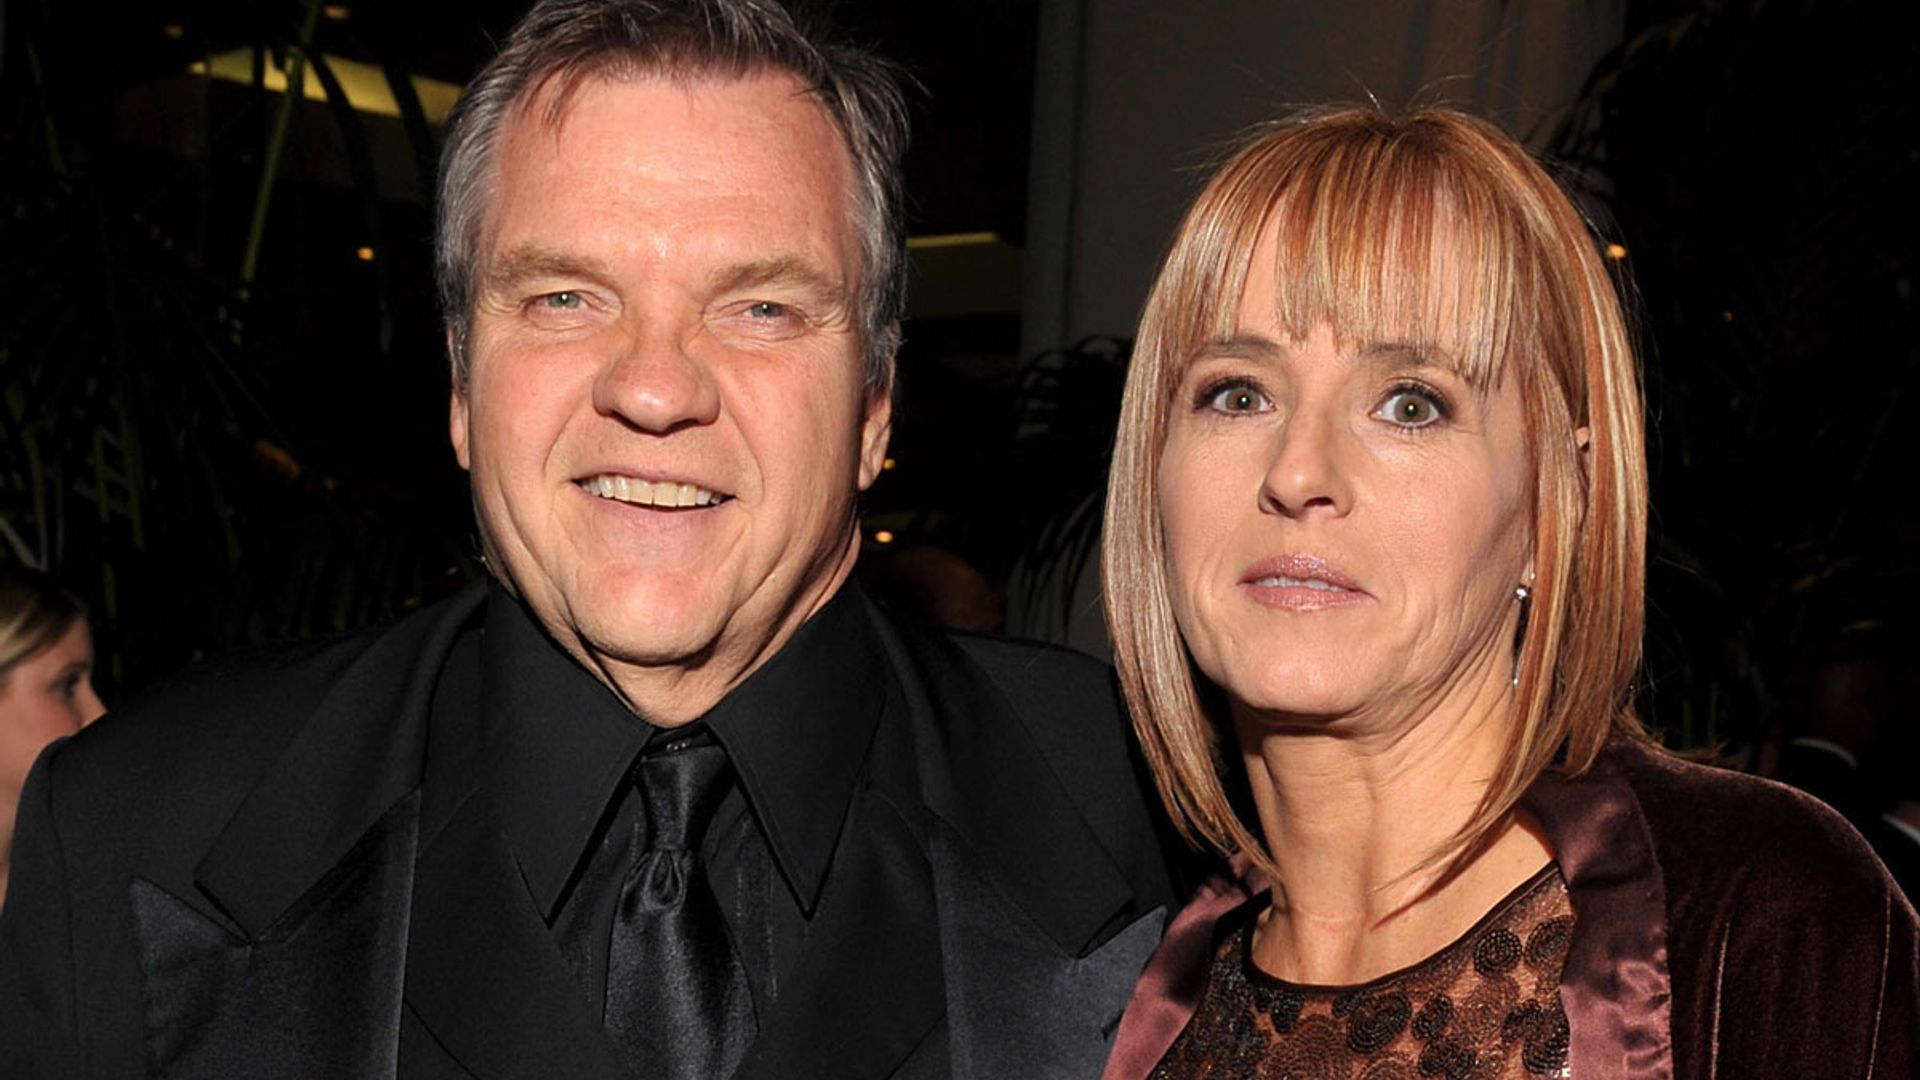 Meat Loaf's home with wife Deborah didn't pay tribute to music career